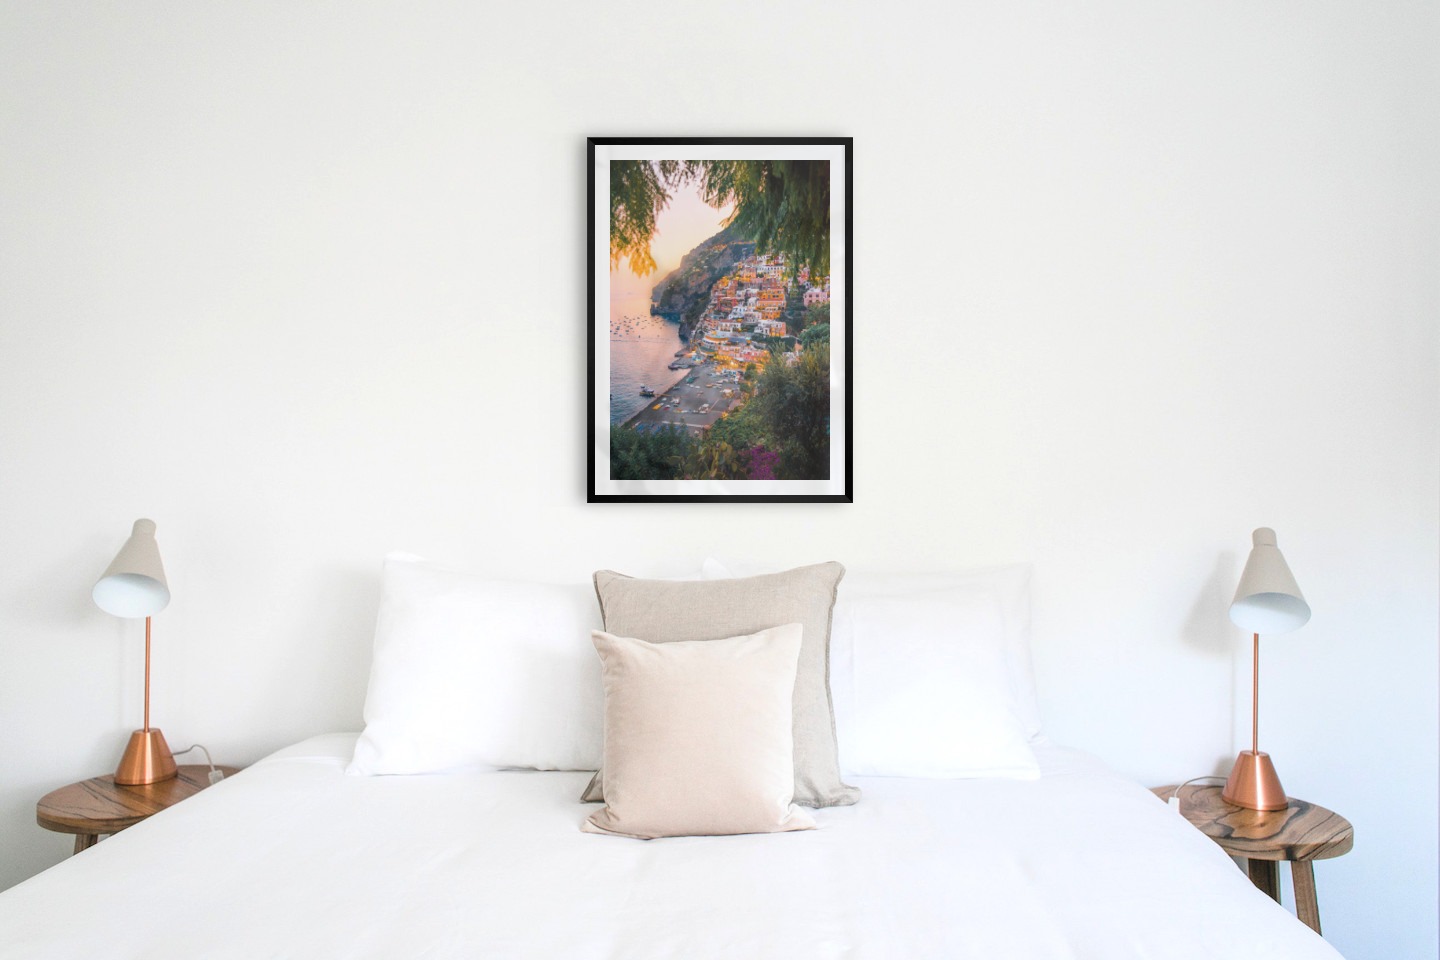 Gallery wall with picture frame in black in size 50x70 with print "City by the sea"